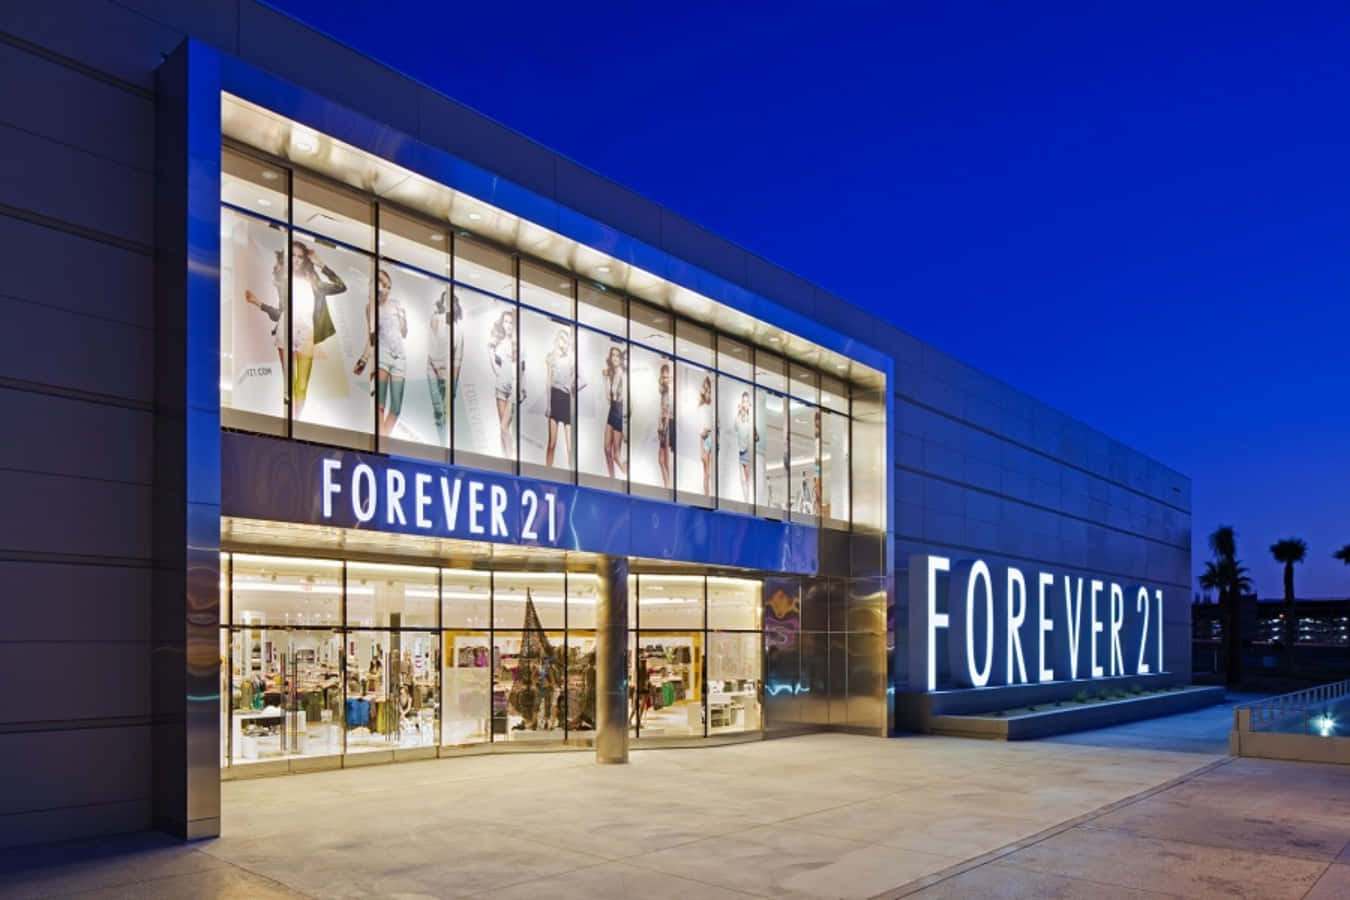 Update your wardrobe with stylish and affordable fashion from Forever 21